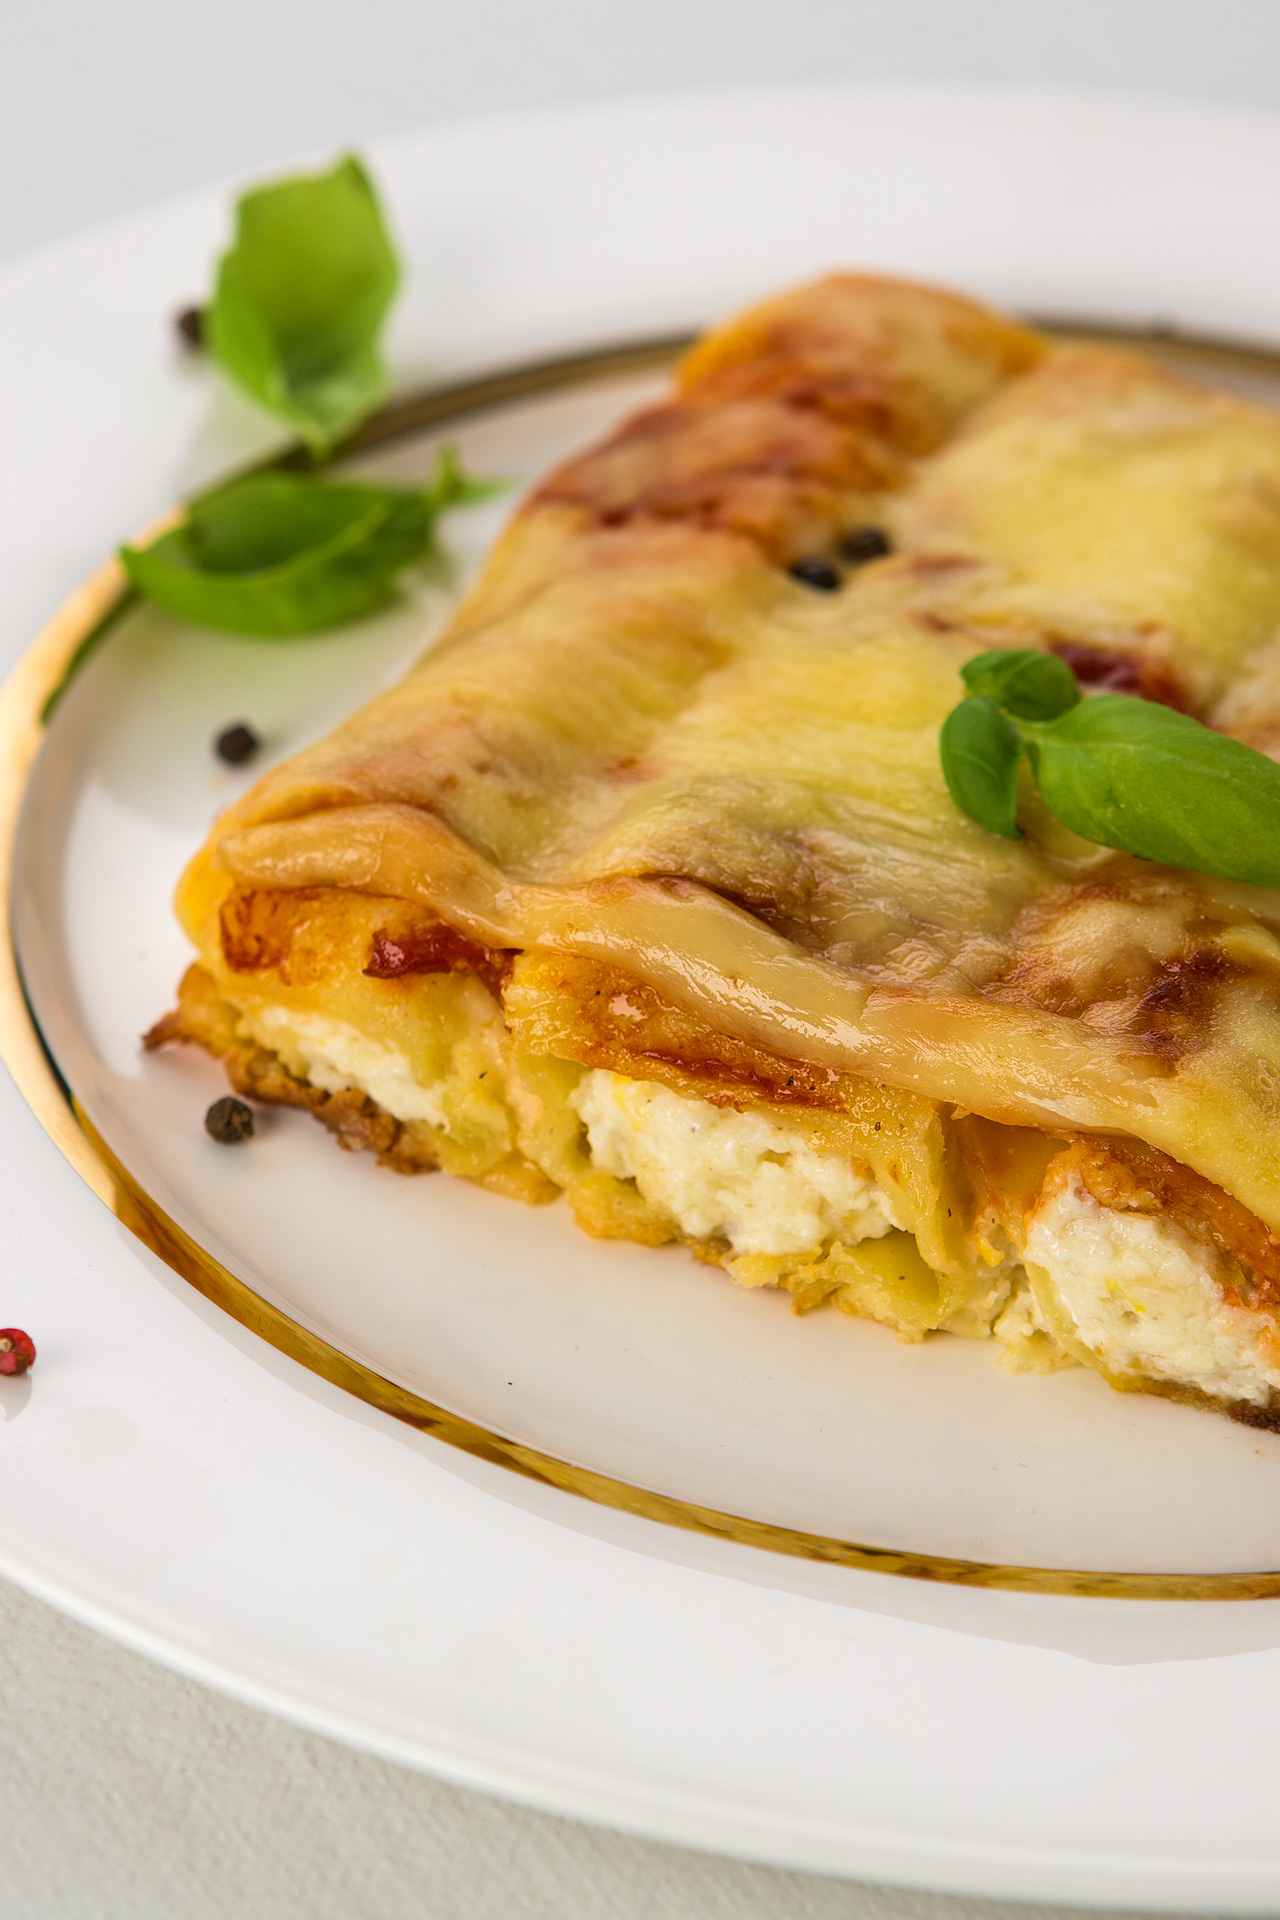 Cannelloni stuffed with goat Ile de France cheese and walnuts